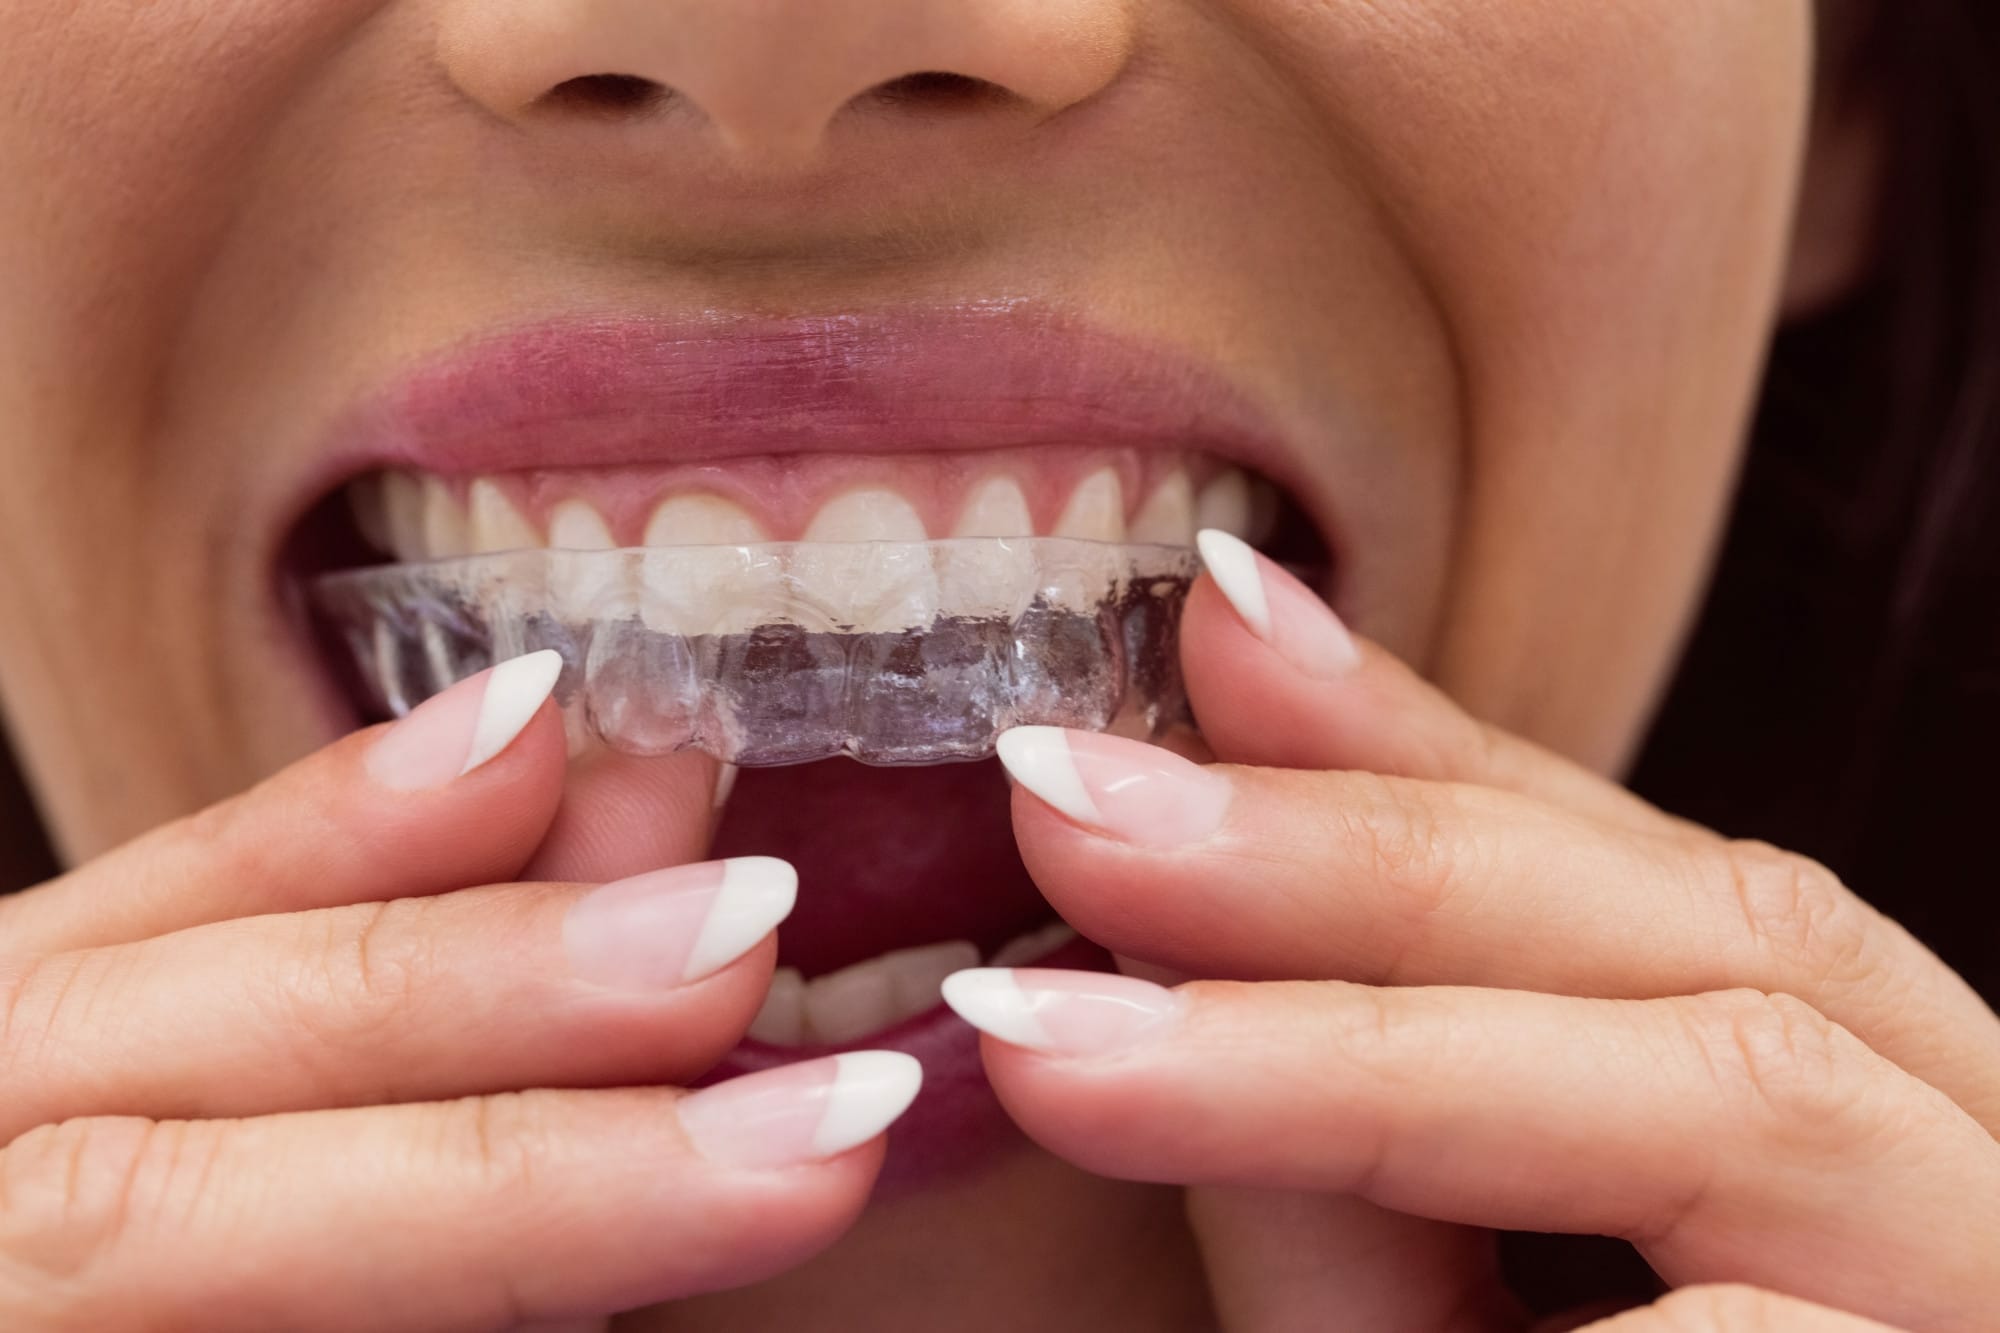 Invisalign aligners : What do I need to know?